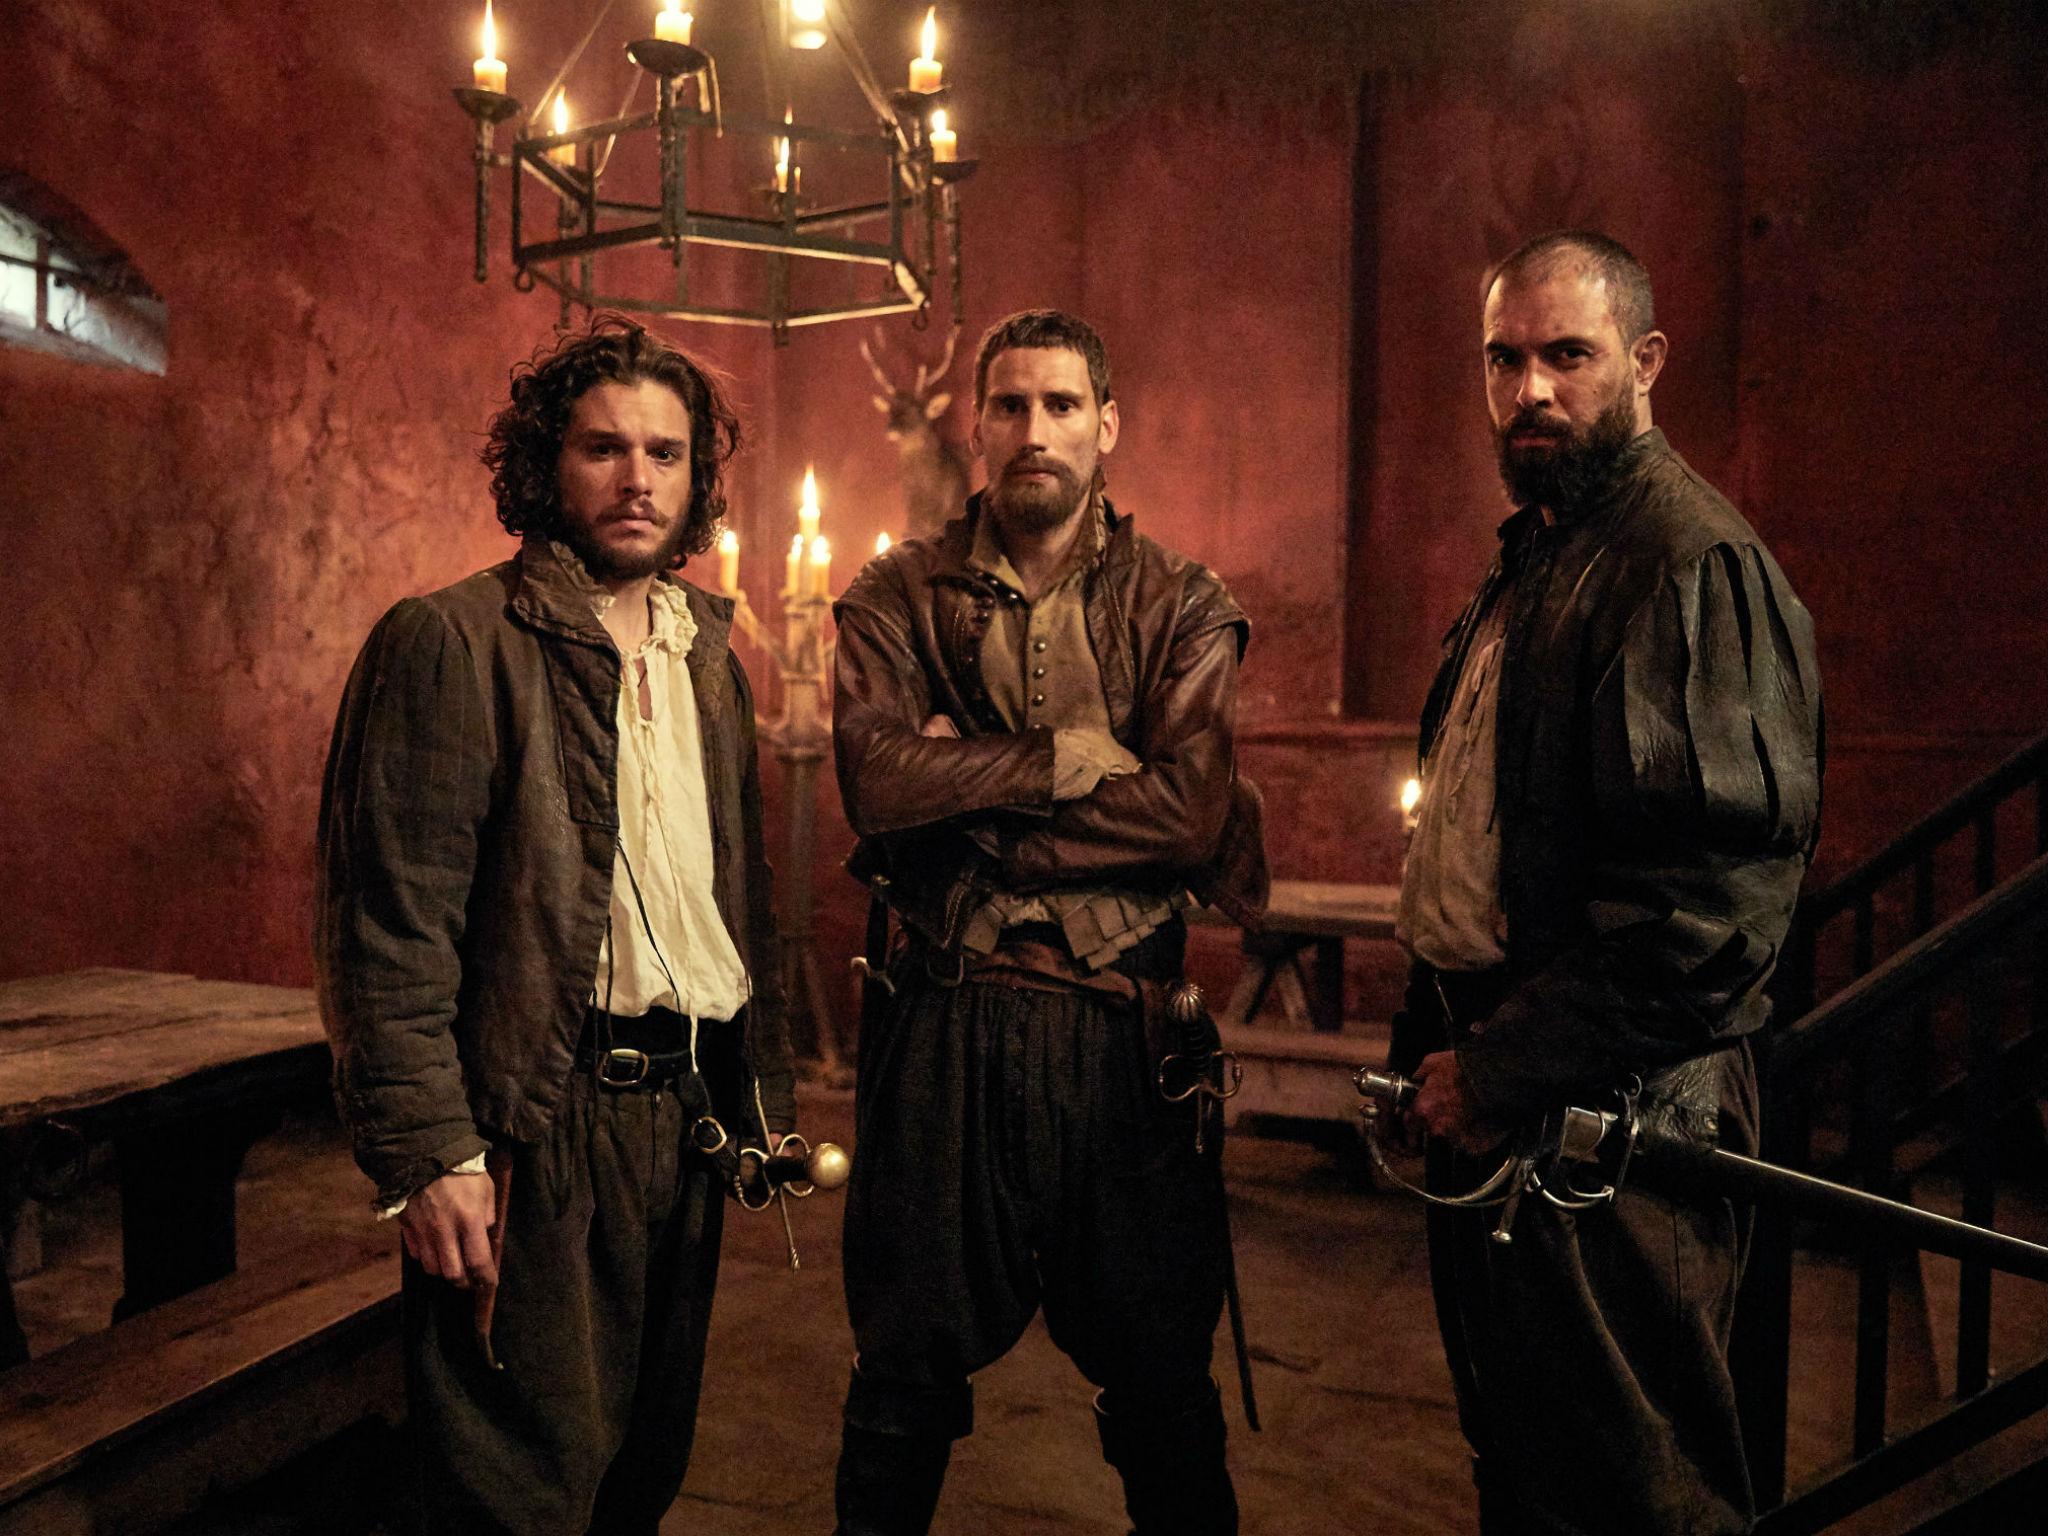 Left to right: Harington as Robert Catesby, Edward Holcroft as Thomas Wintour, and Tom Cullen as Guy Fawkes in 'Gunpowder'